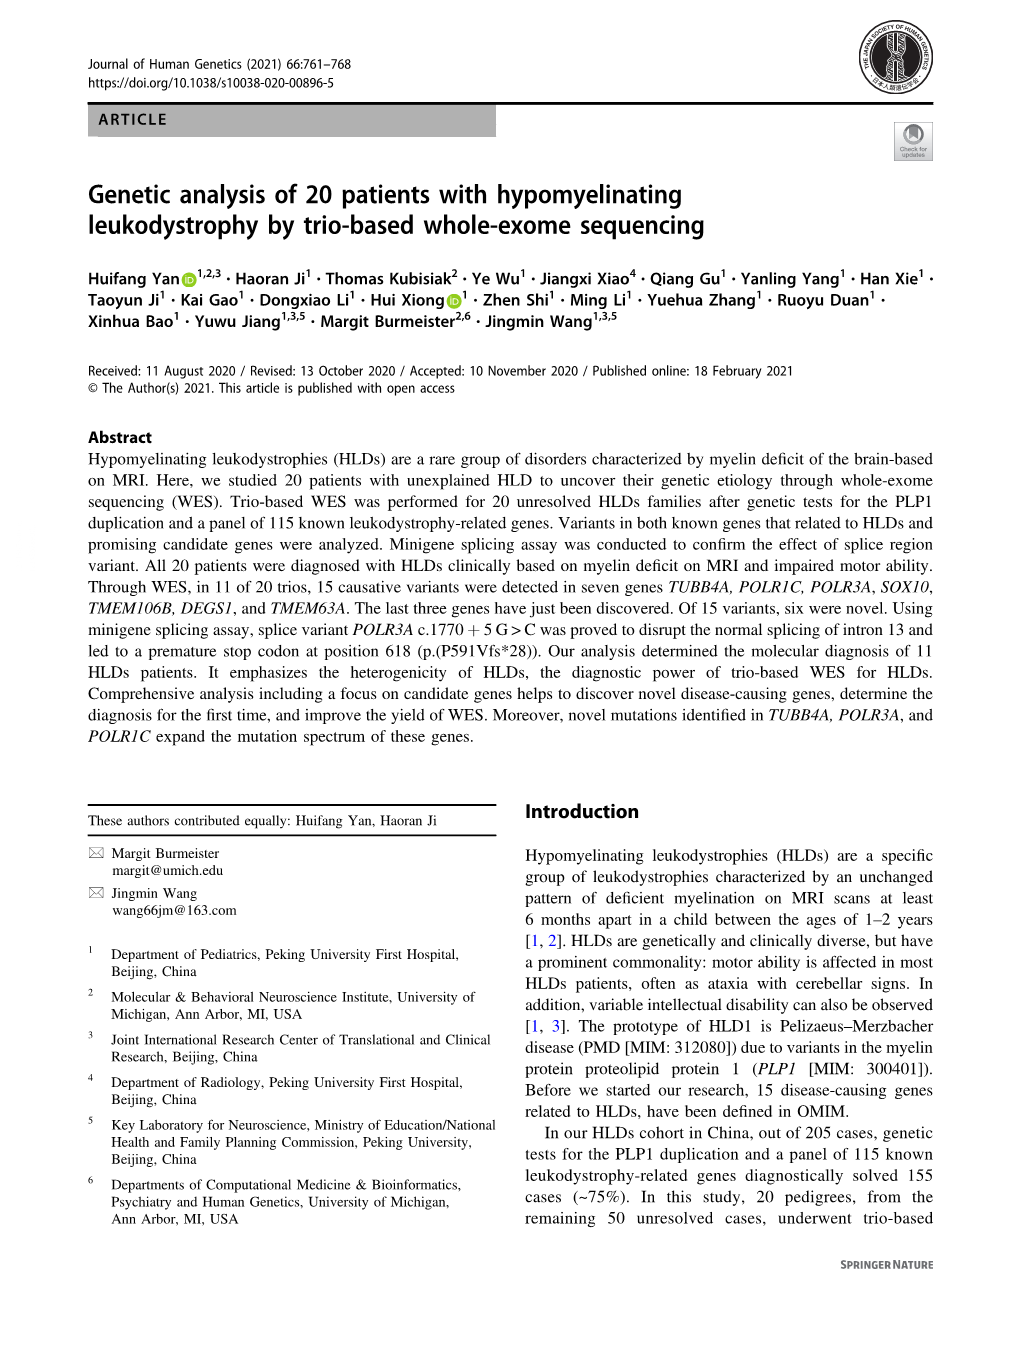 Genetic Analysis of 20 Patients with Hypomyelinating Leukodystrophy by Trio-Based Whole-Exome Sequencing